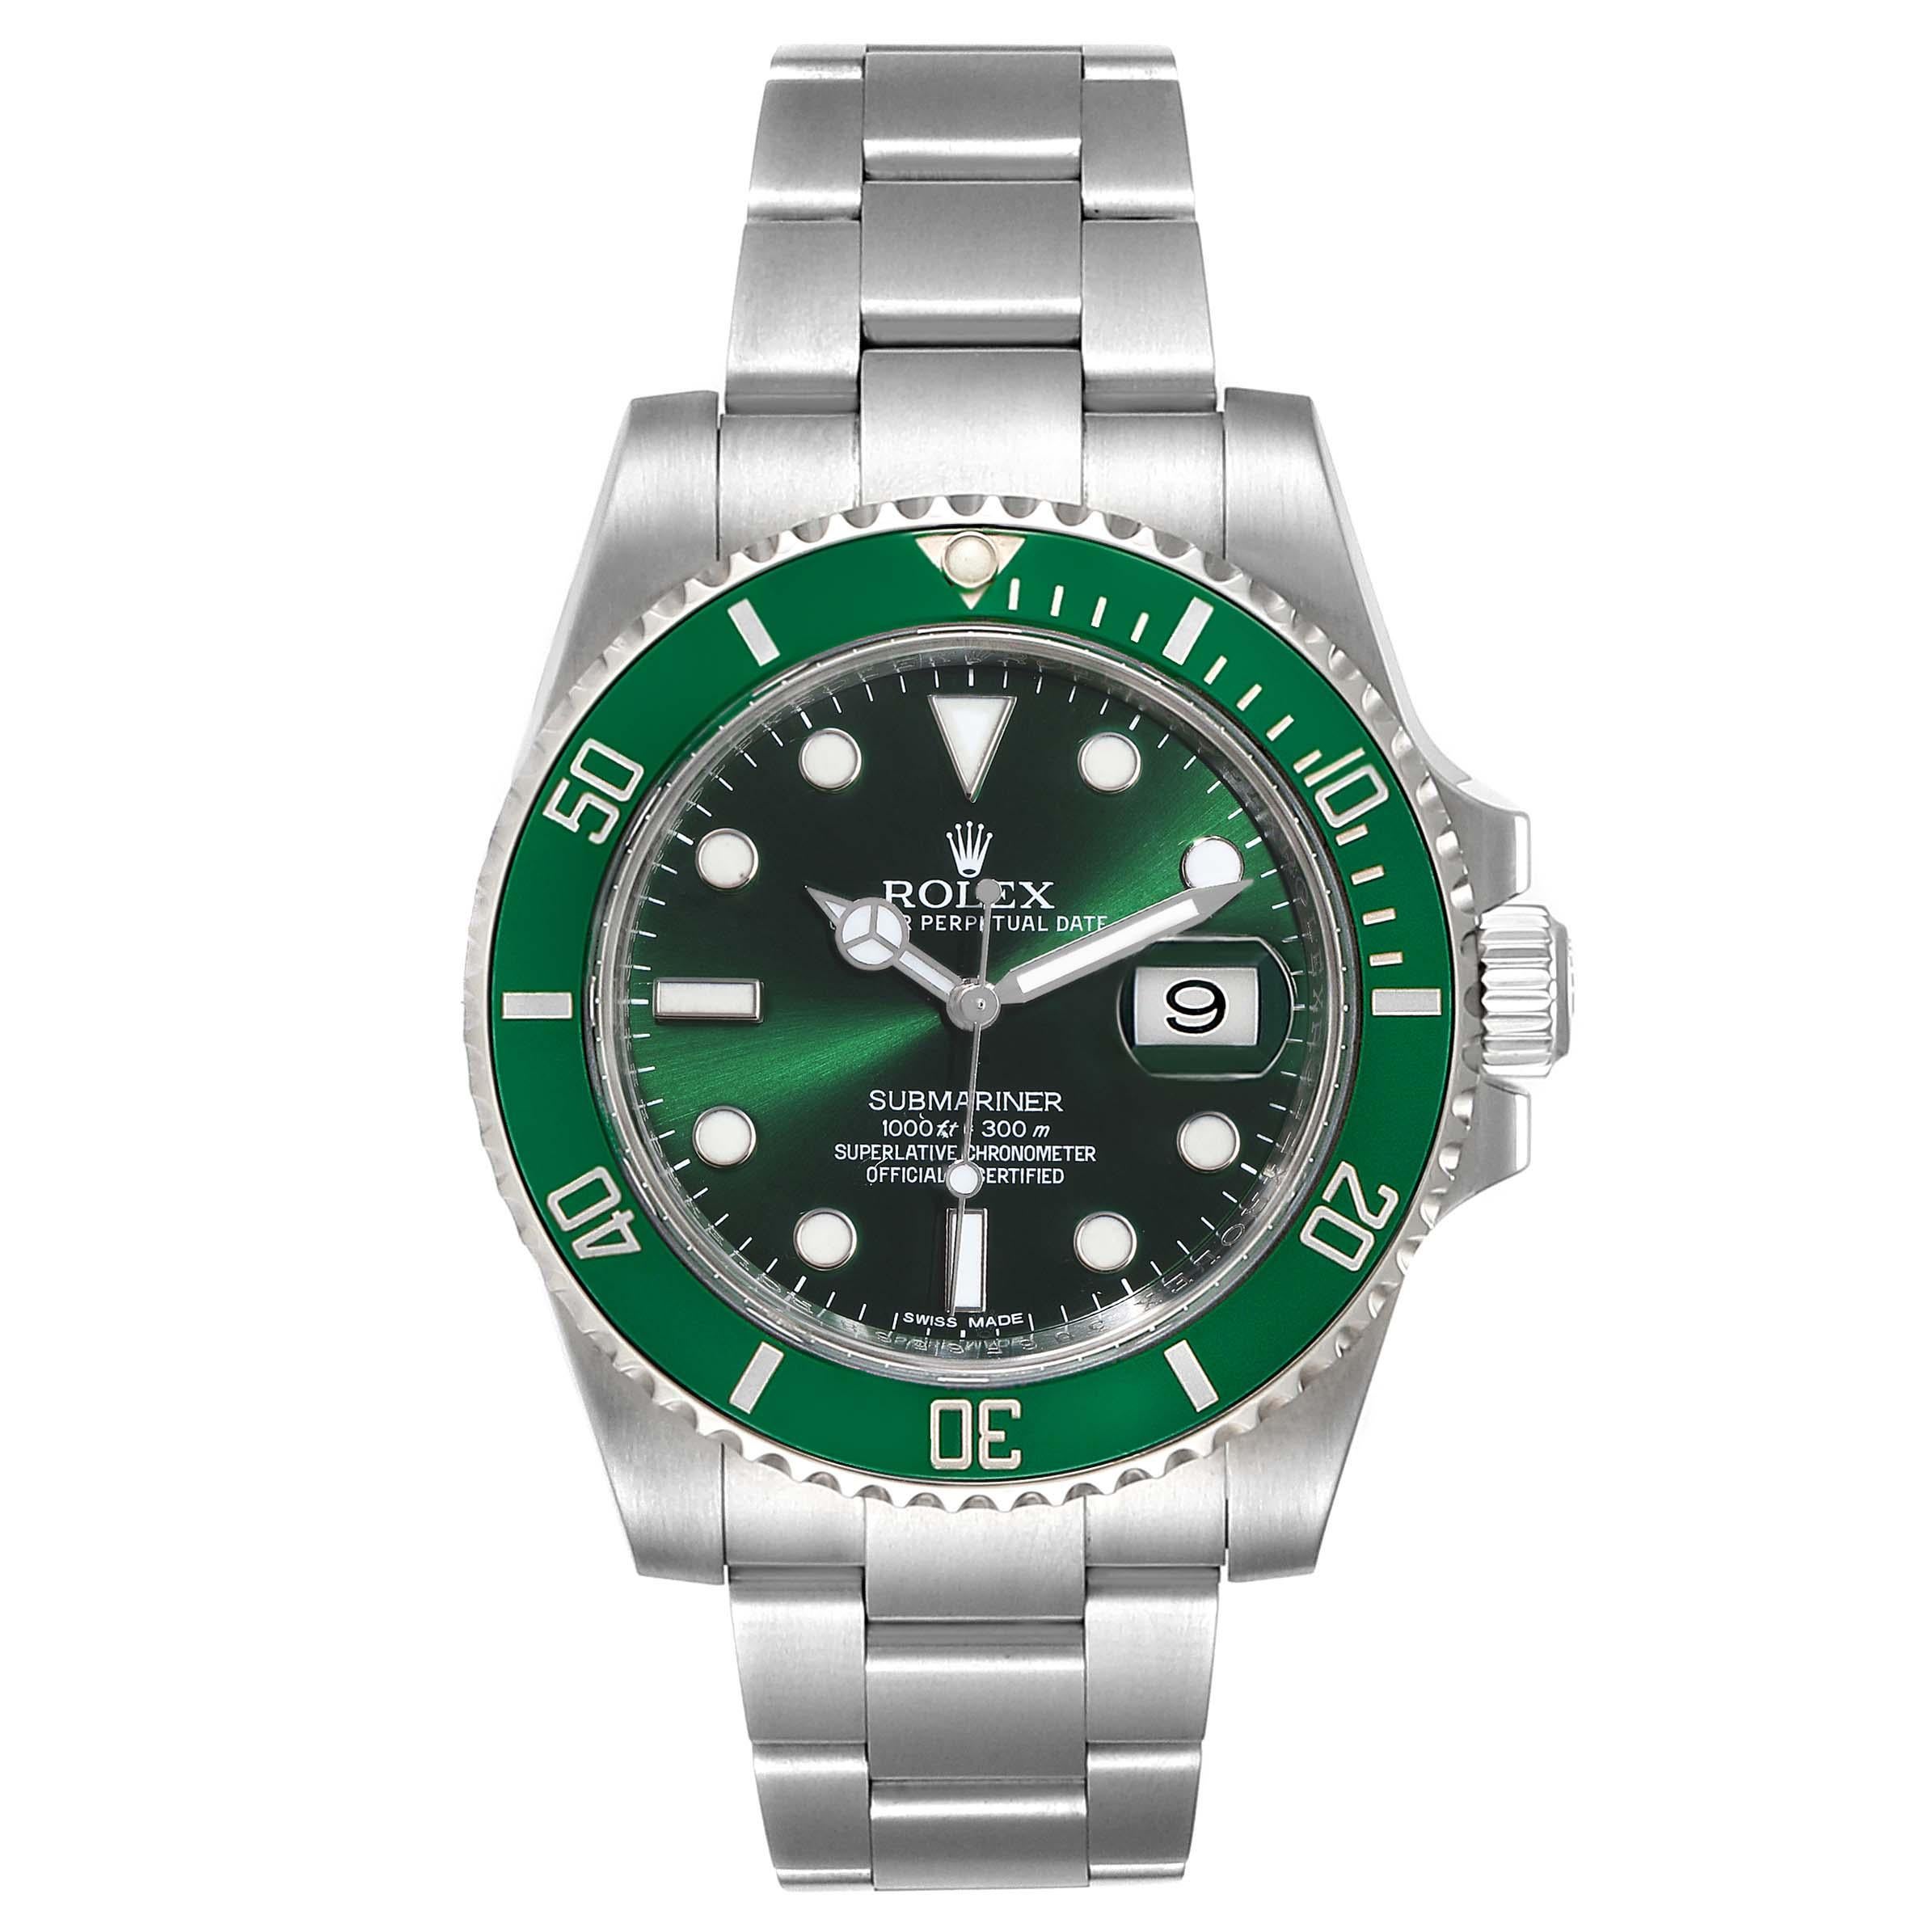 Rolex Submariner Hulk Green Dial Bezel Mens Watch 116610LV Box Card. Officially certified chronometer self-winding movement. Oyster case 40 mm in diameter. Rolex logo on a crown. Special time-lapse unidirectional rotating green ceramic bezel.